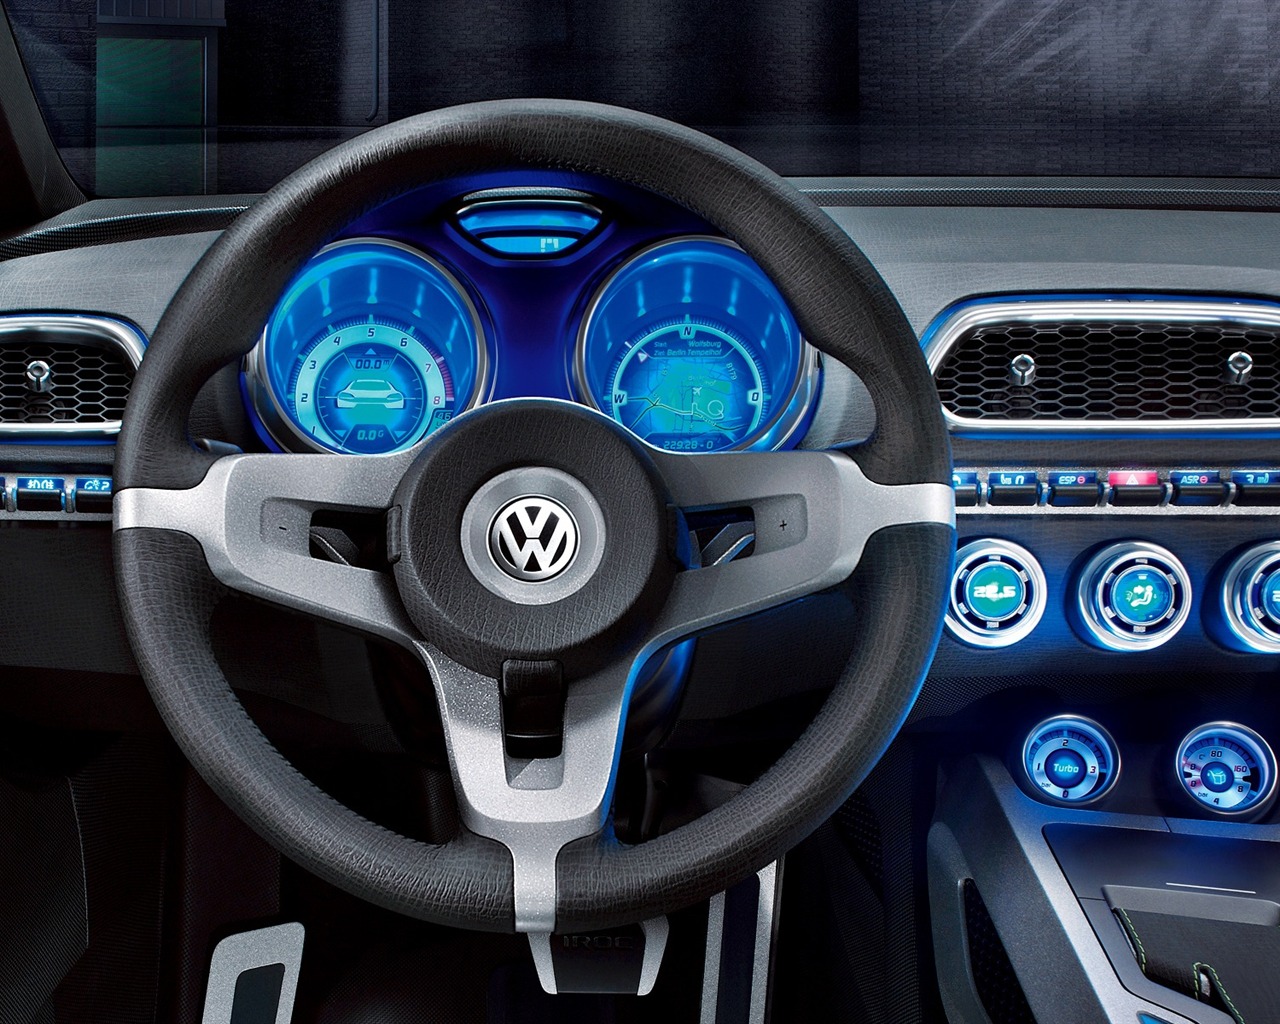 Volkswagen Concept Car tapety (2) #6 - 1280x1024